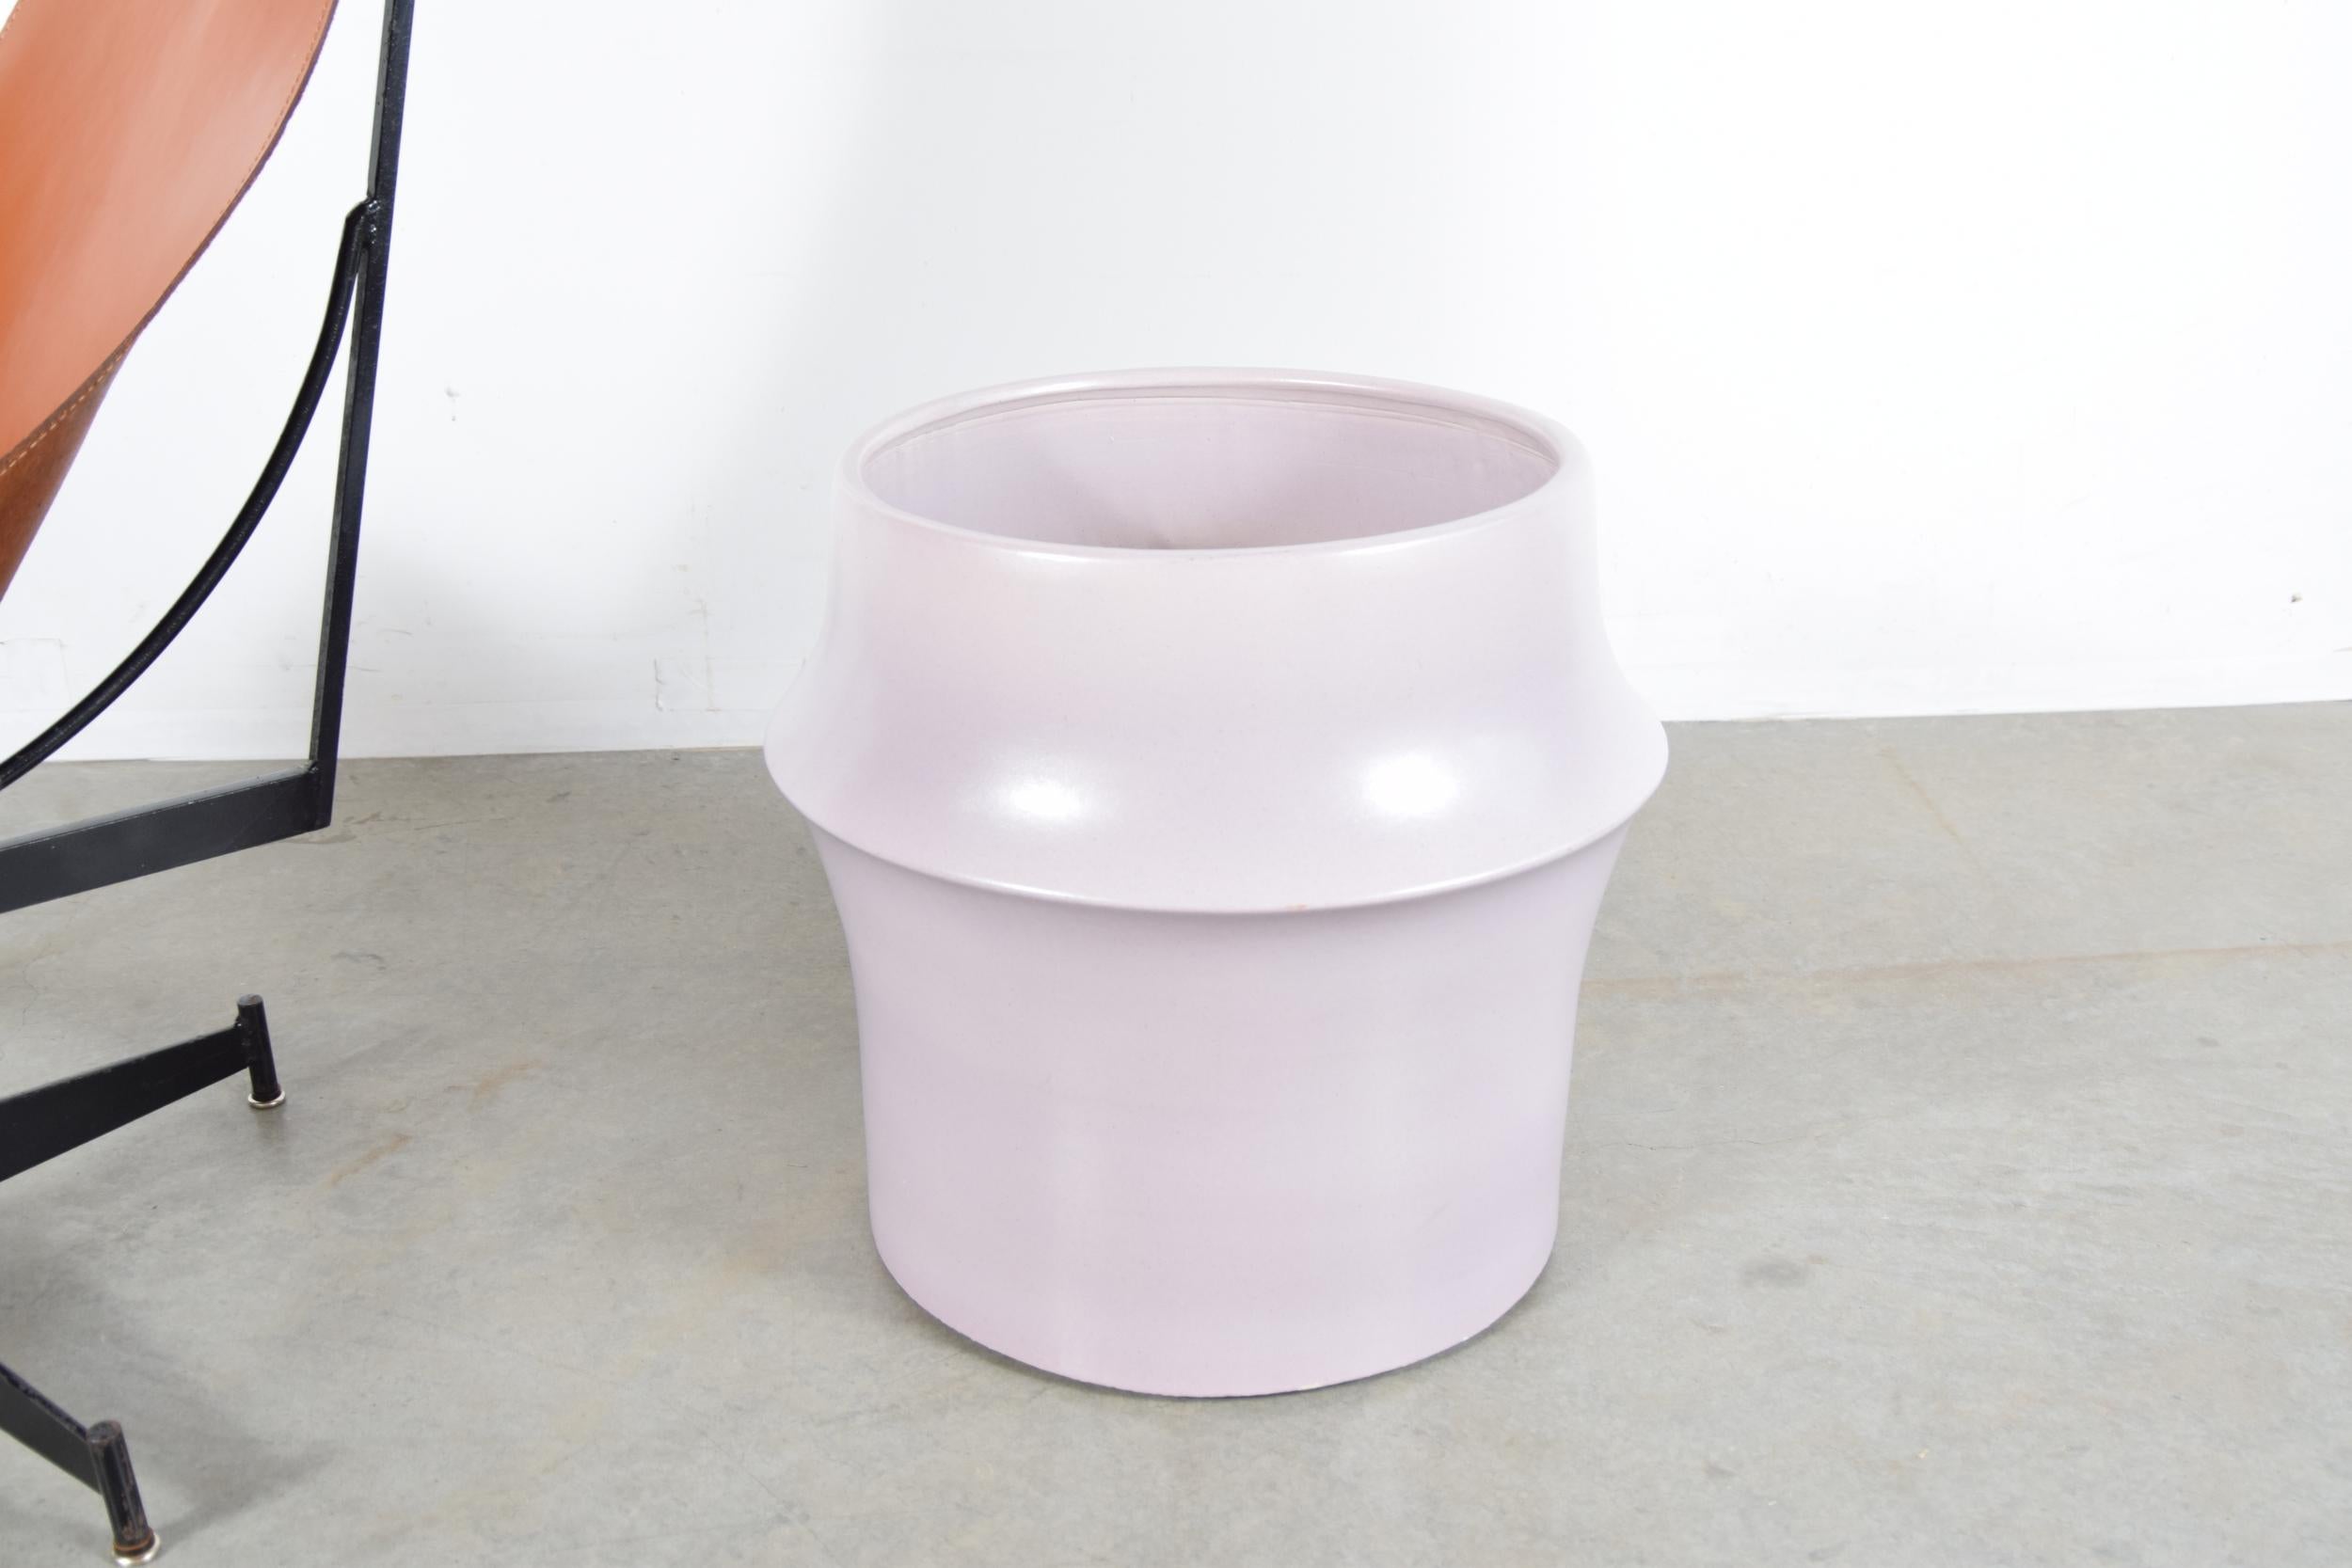 Architectural pottery planter by Marilyn Kay Austin, in an unusual color. I would describe the color as being a light purple. Piece stands 18